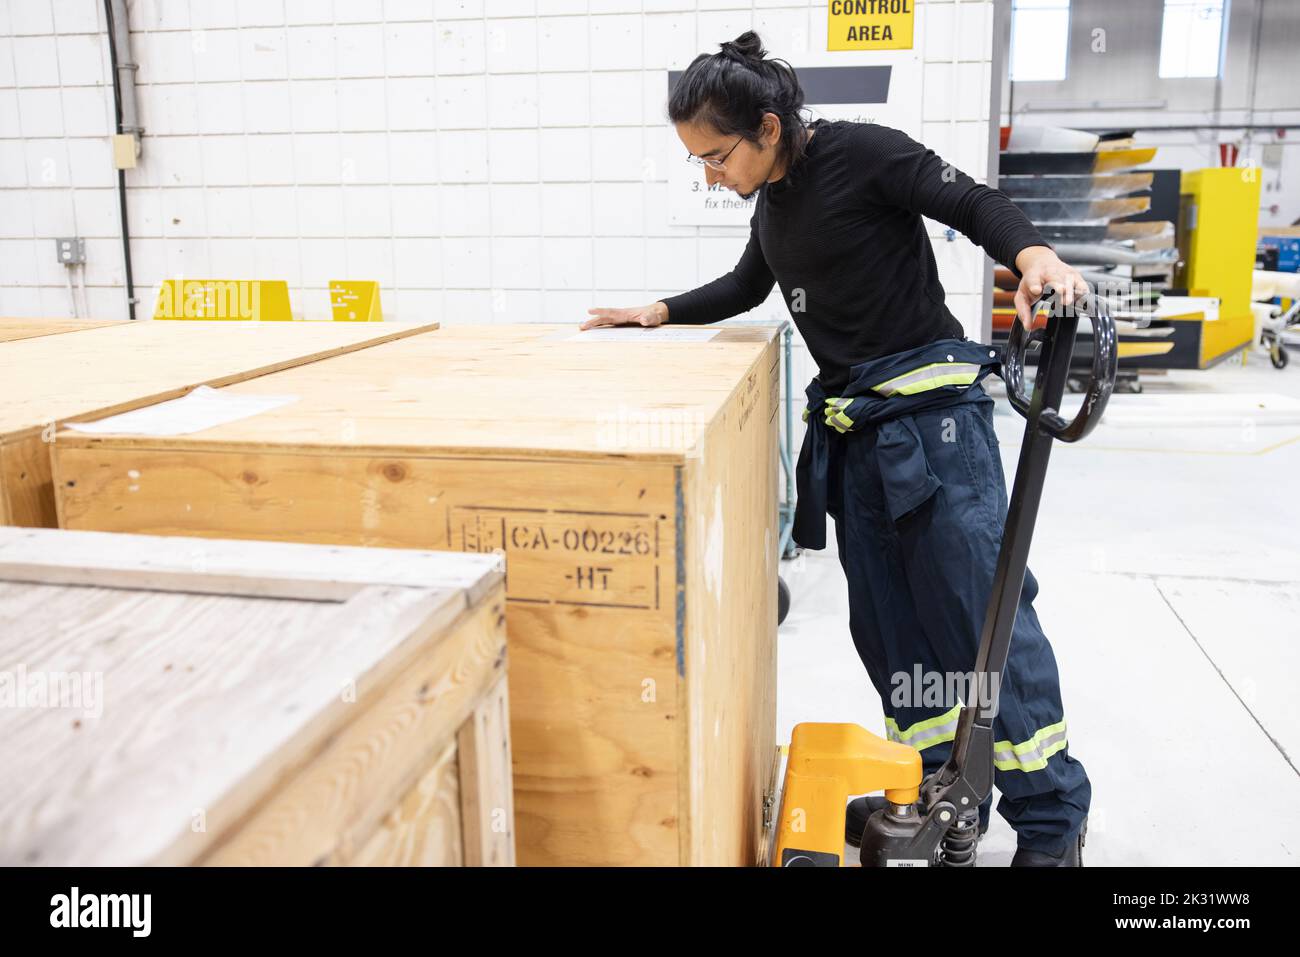 Technician selecting crate in loading bay Stock Photo